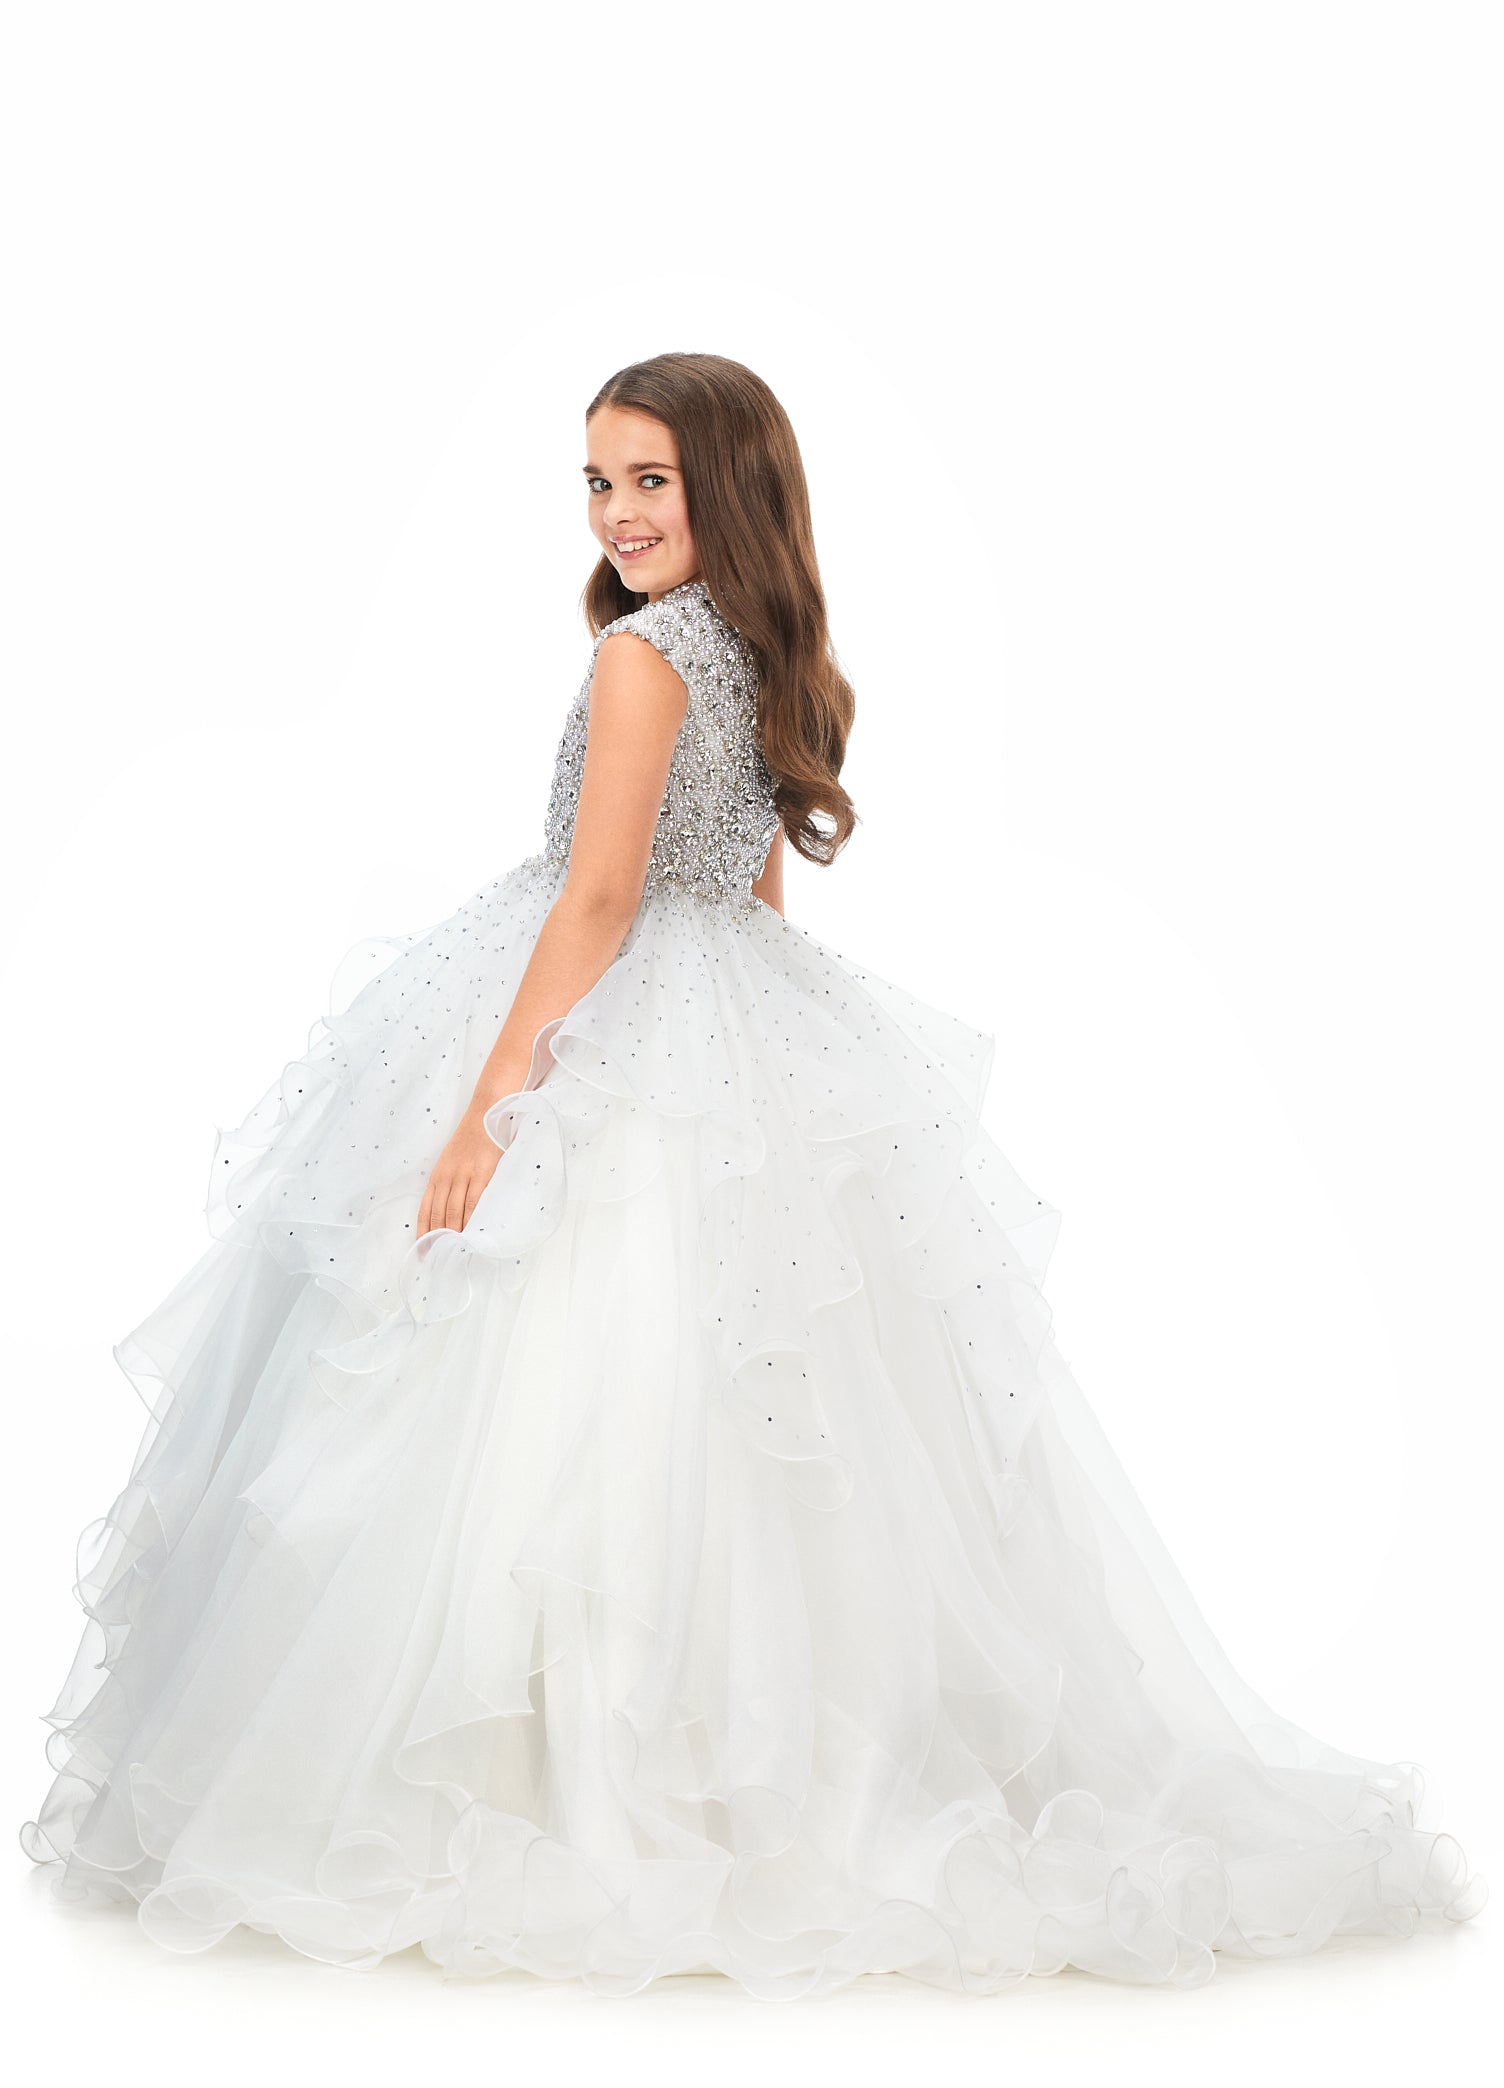 Ashley Lauren Kids 8180 Girls High Neckline Ball Gown with Organza Ruffle Pageant Skirt  Make them stop and stare in this kids high neckline ball gown with cap sleeves. The fully encrusted crystal and pearl bodice is sure to have all eyes on you. The a-line organza ruffle skirt is complete with scattered heat set stones throughout.